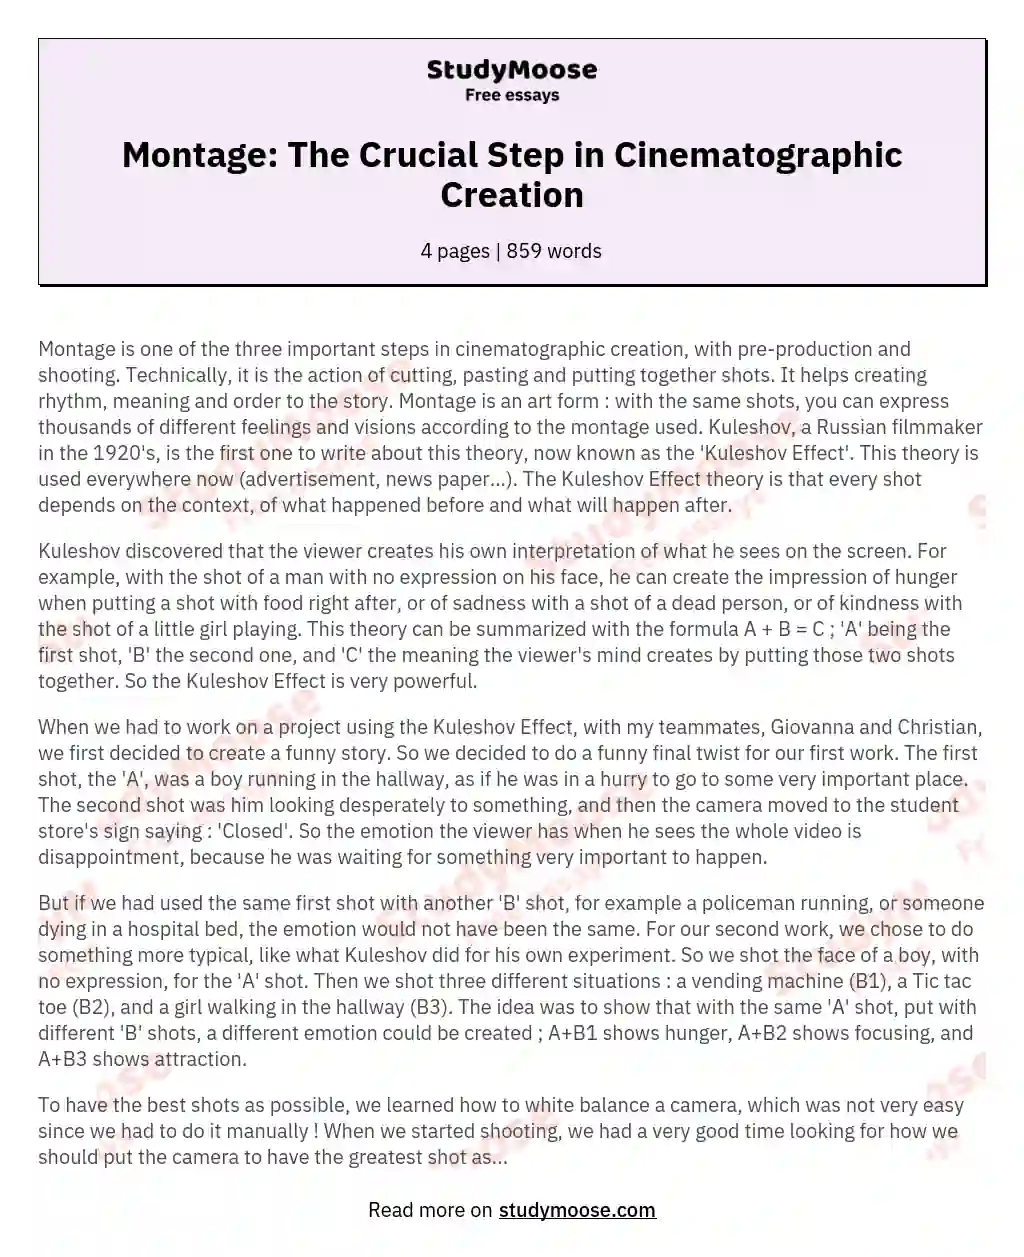 Montage: The Crucial Step in Cinematographic Creation essay